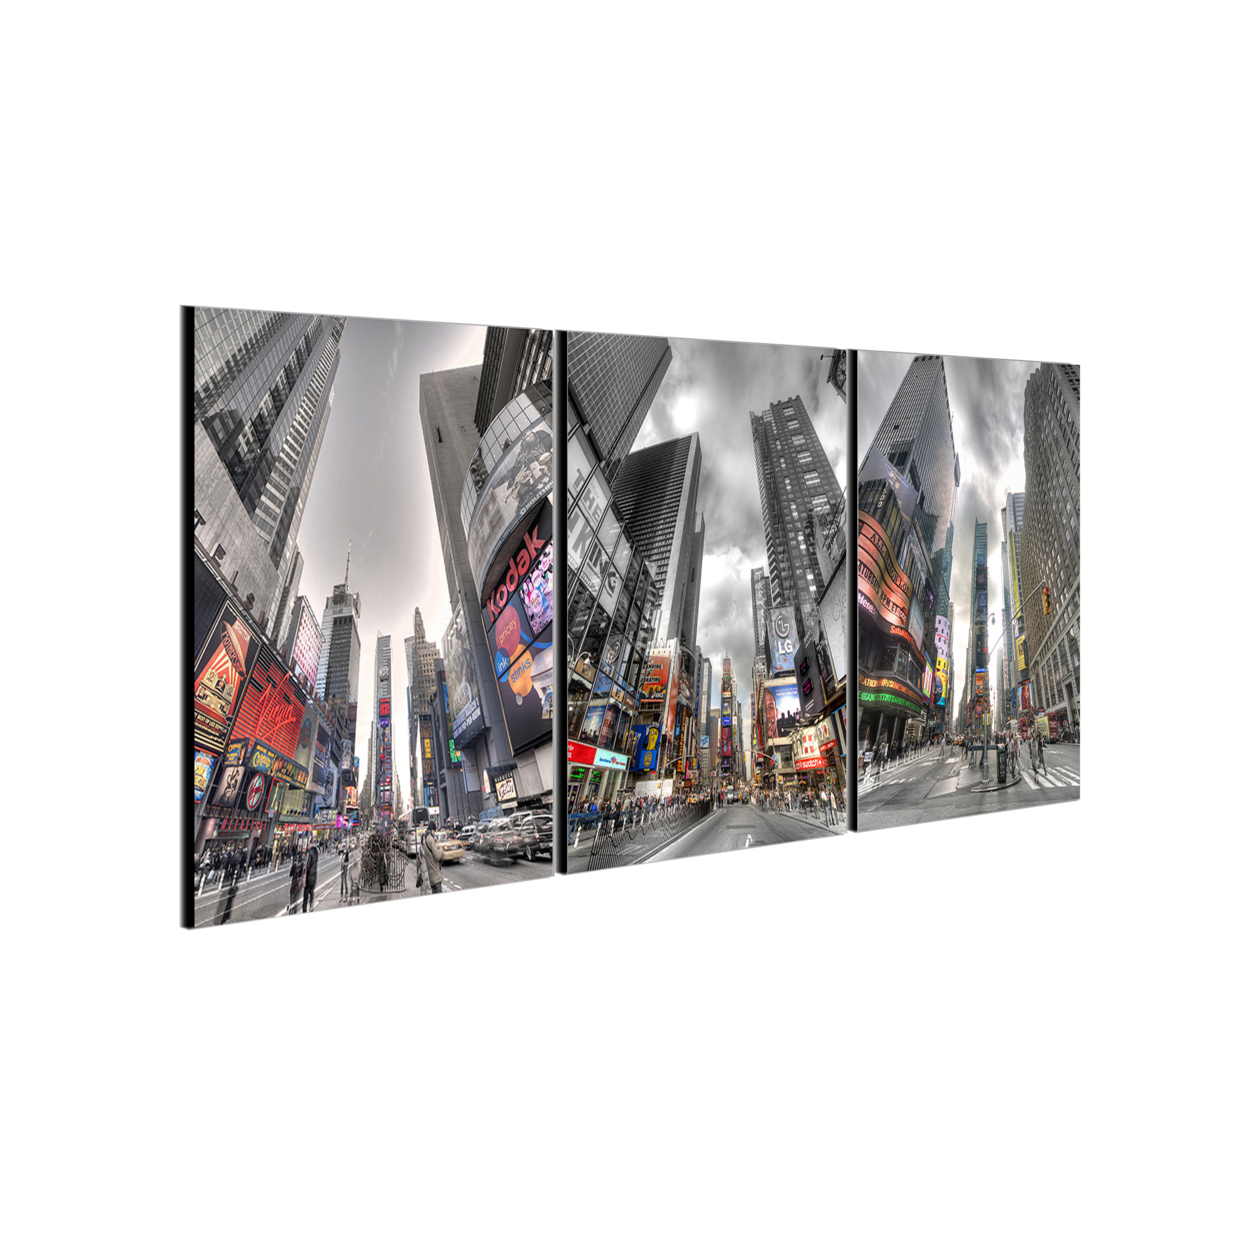 City Life 3 Piece Wrapped Canvas Wall Art Print 20x40.5 Inches